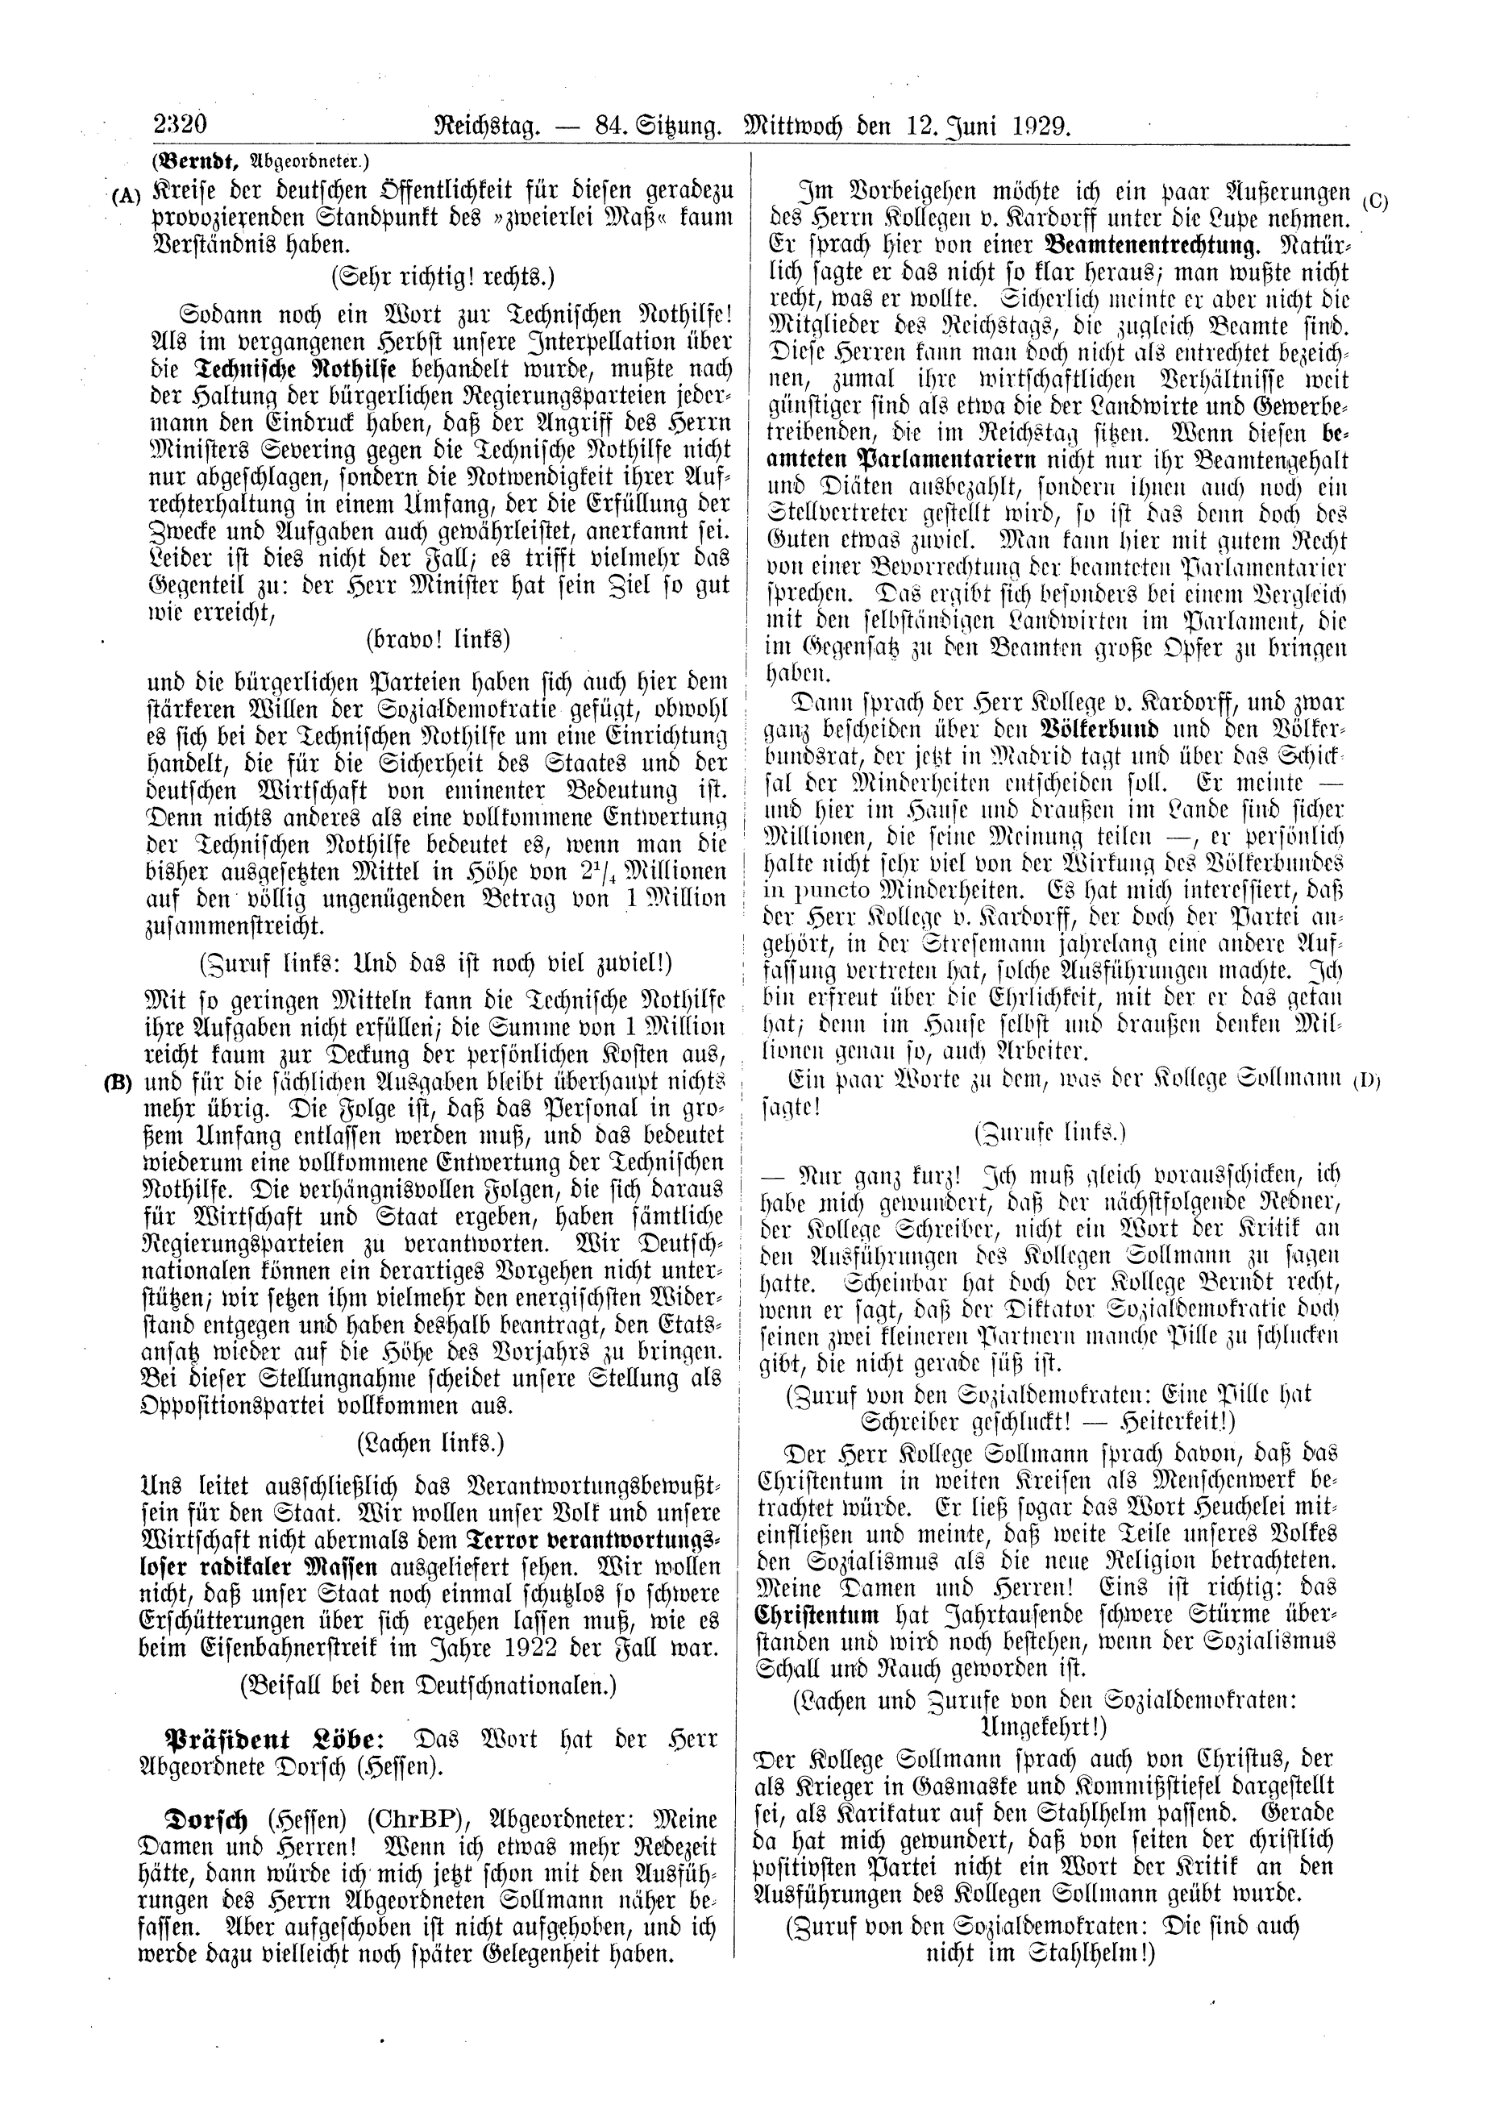 Scan of page 2320